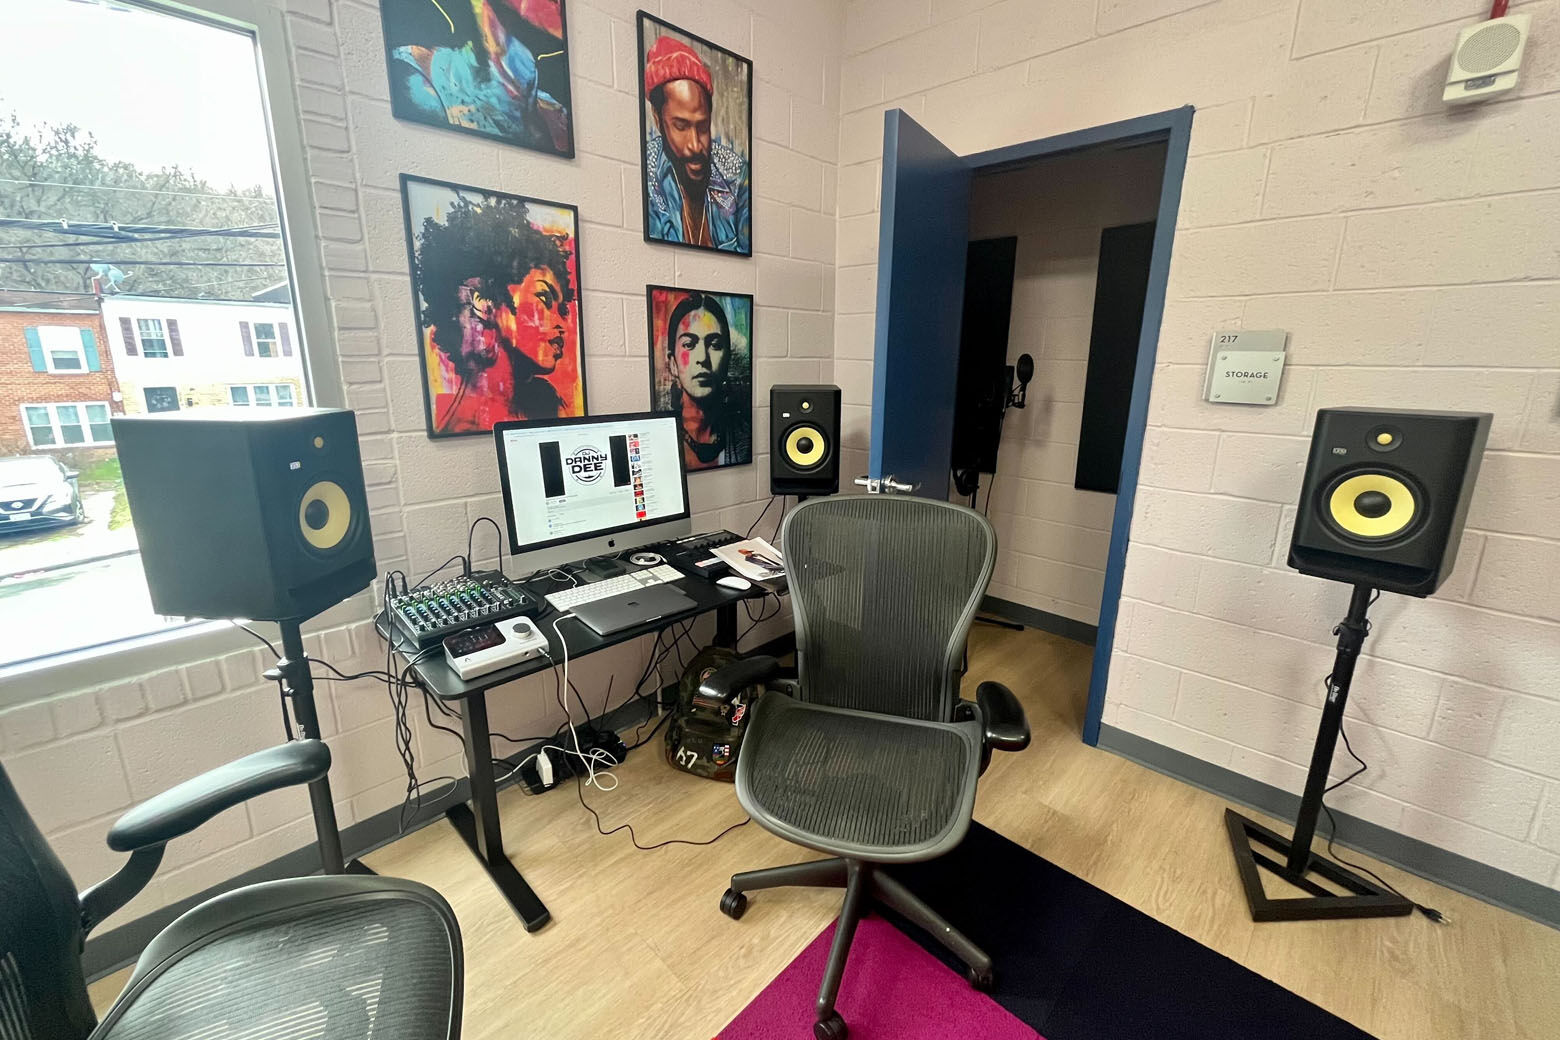 The new space is meant to give young people a creative outlet, allowing them to express themselves by producing music or recording podcasts, among other activities. (WTOP/Nick Iannelli)